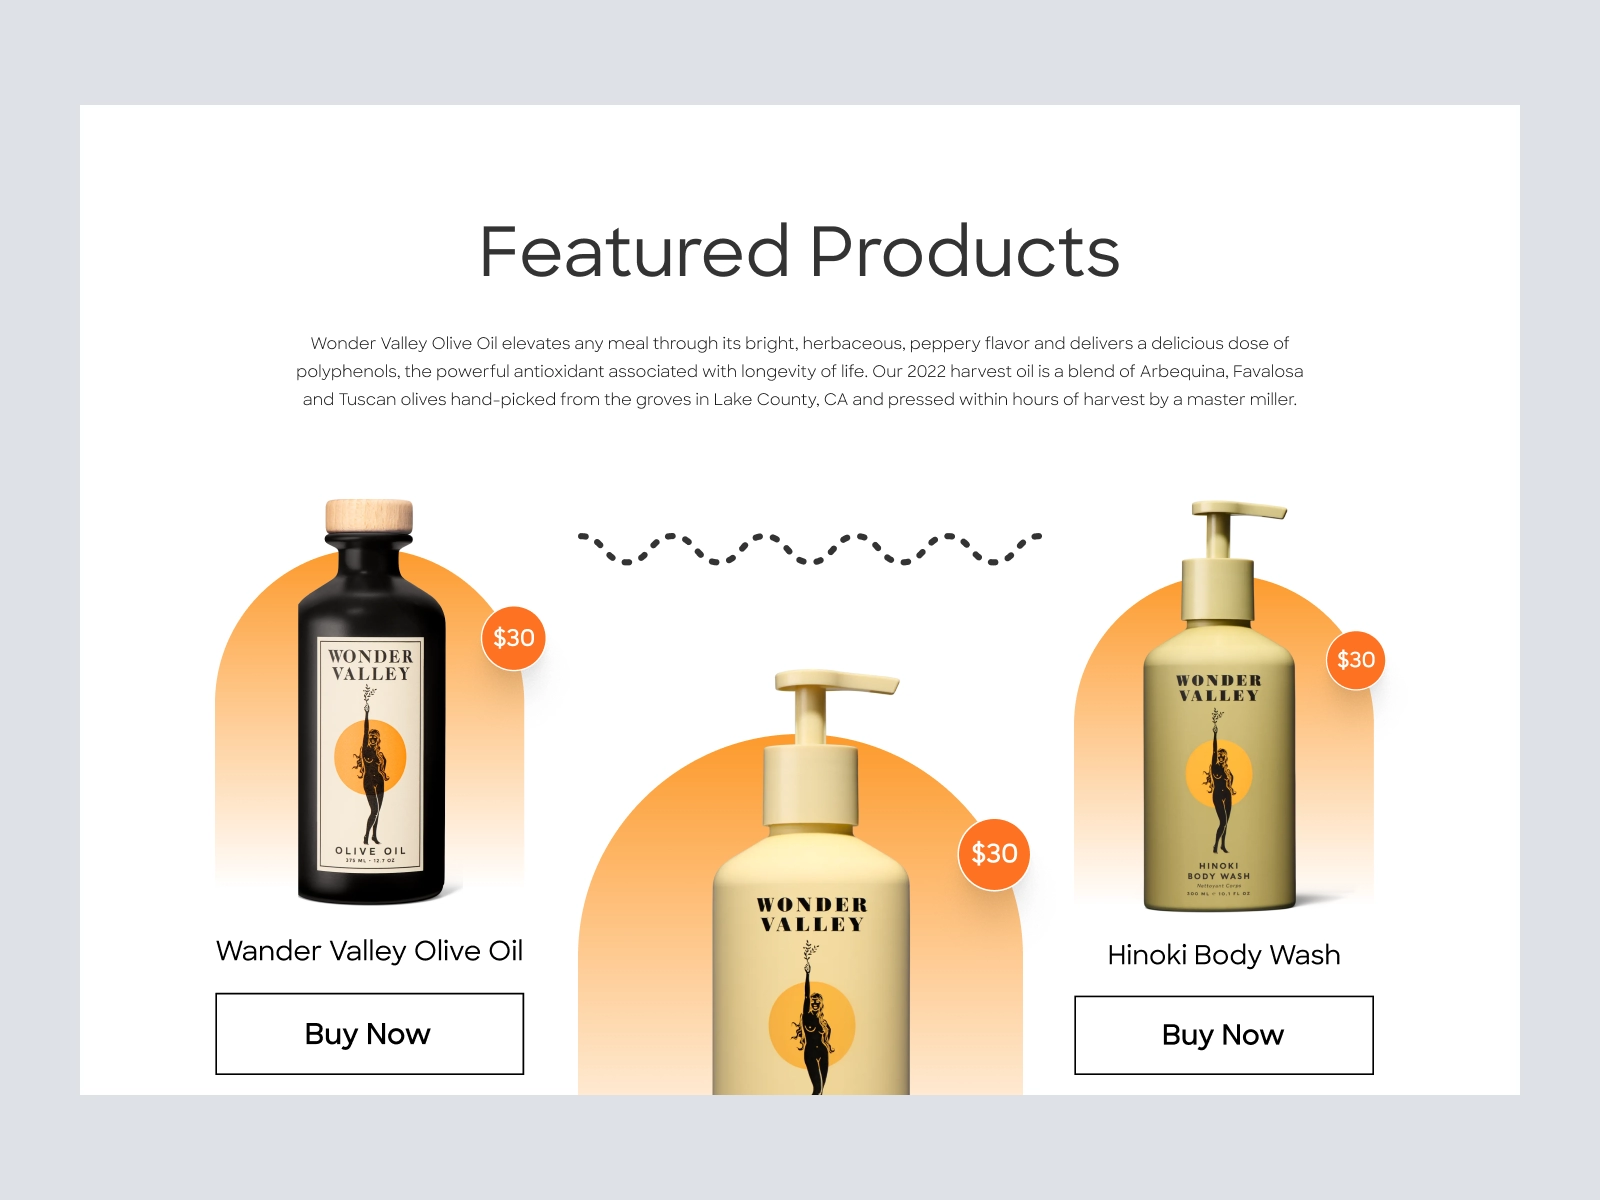 Wonder Valley - Olive Oil Shopify Store Design for Figma and Adobe XD - screen 2